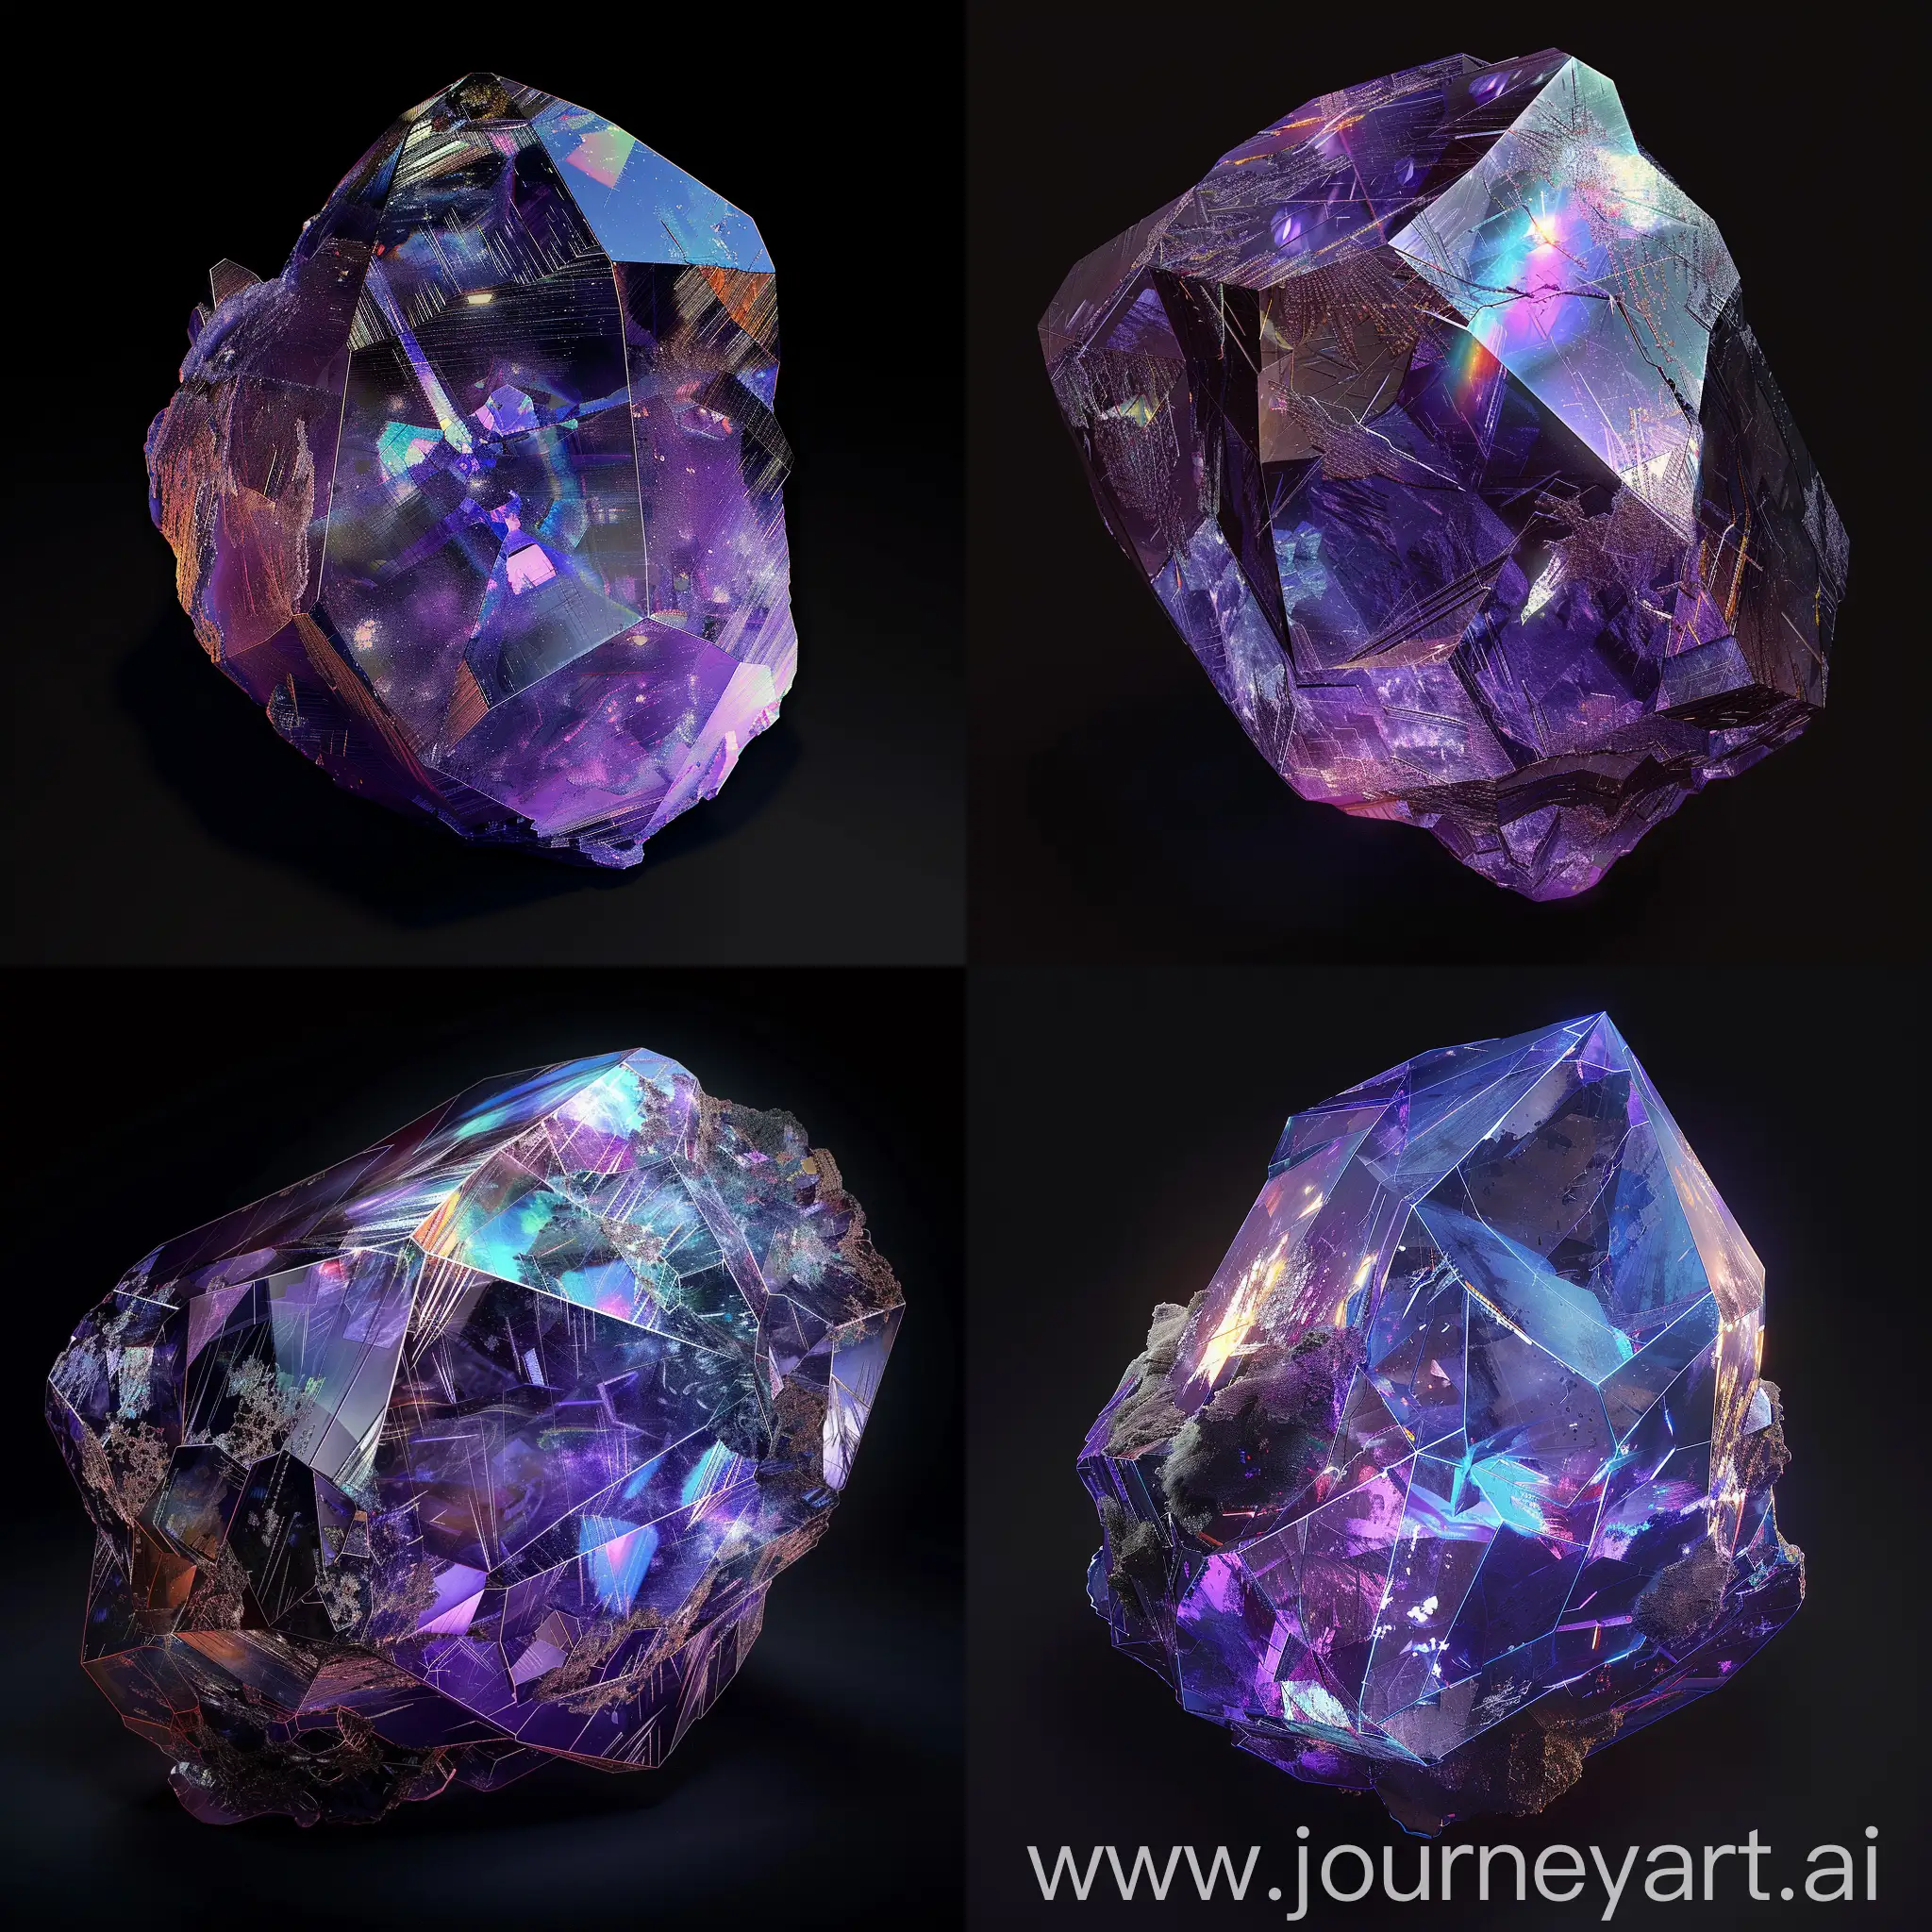 Spectacular-Deep-Purple-Crystal-with-Refracted-Rainbow-Spectrum-on-Black-Background